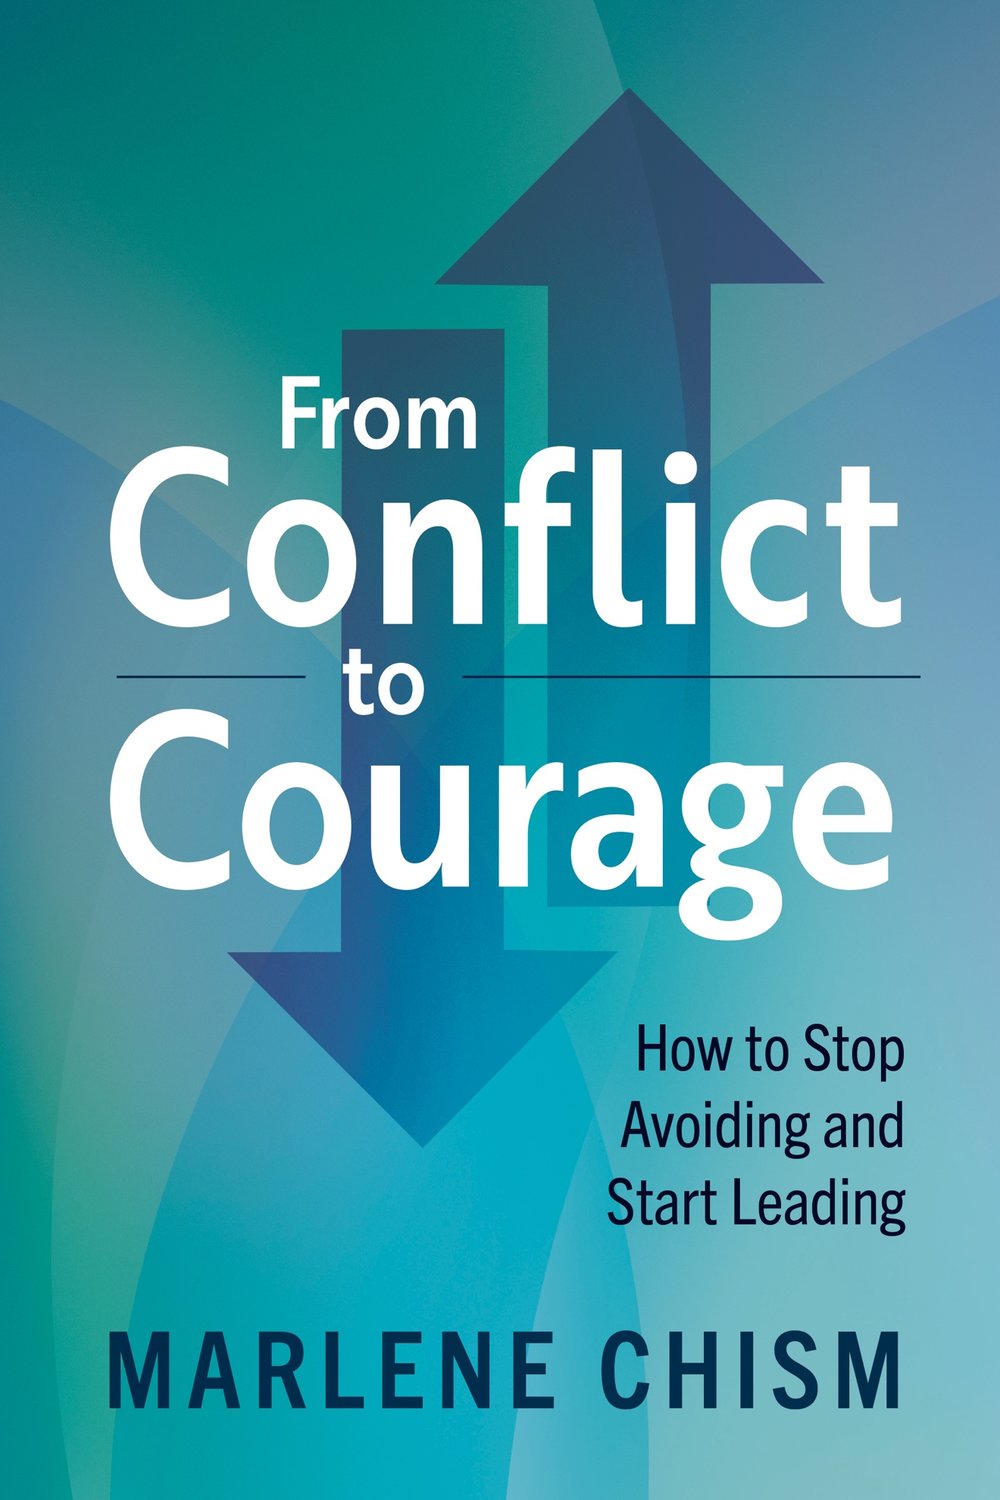 Marlene Chism's latest book, "From Conflict to Courage: How to Stop Avoiding and Start Leading," is now available.